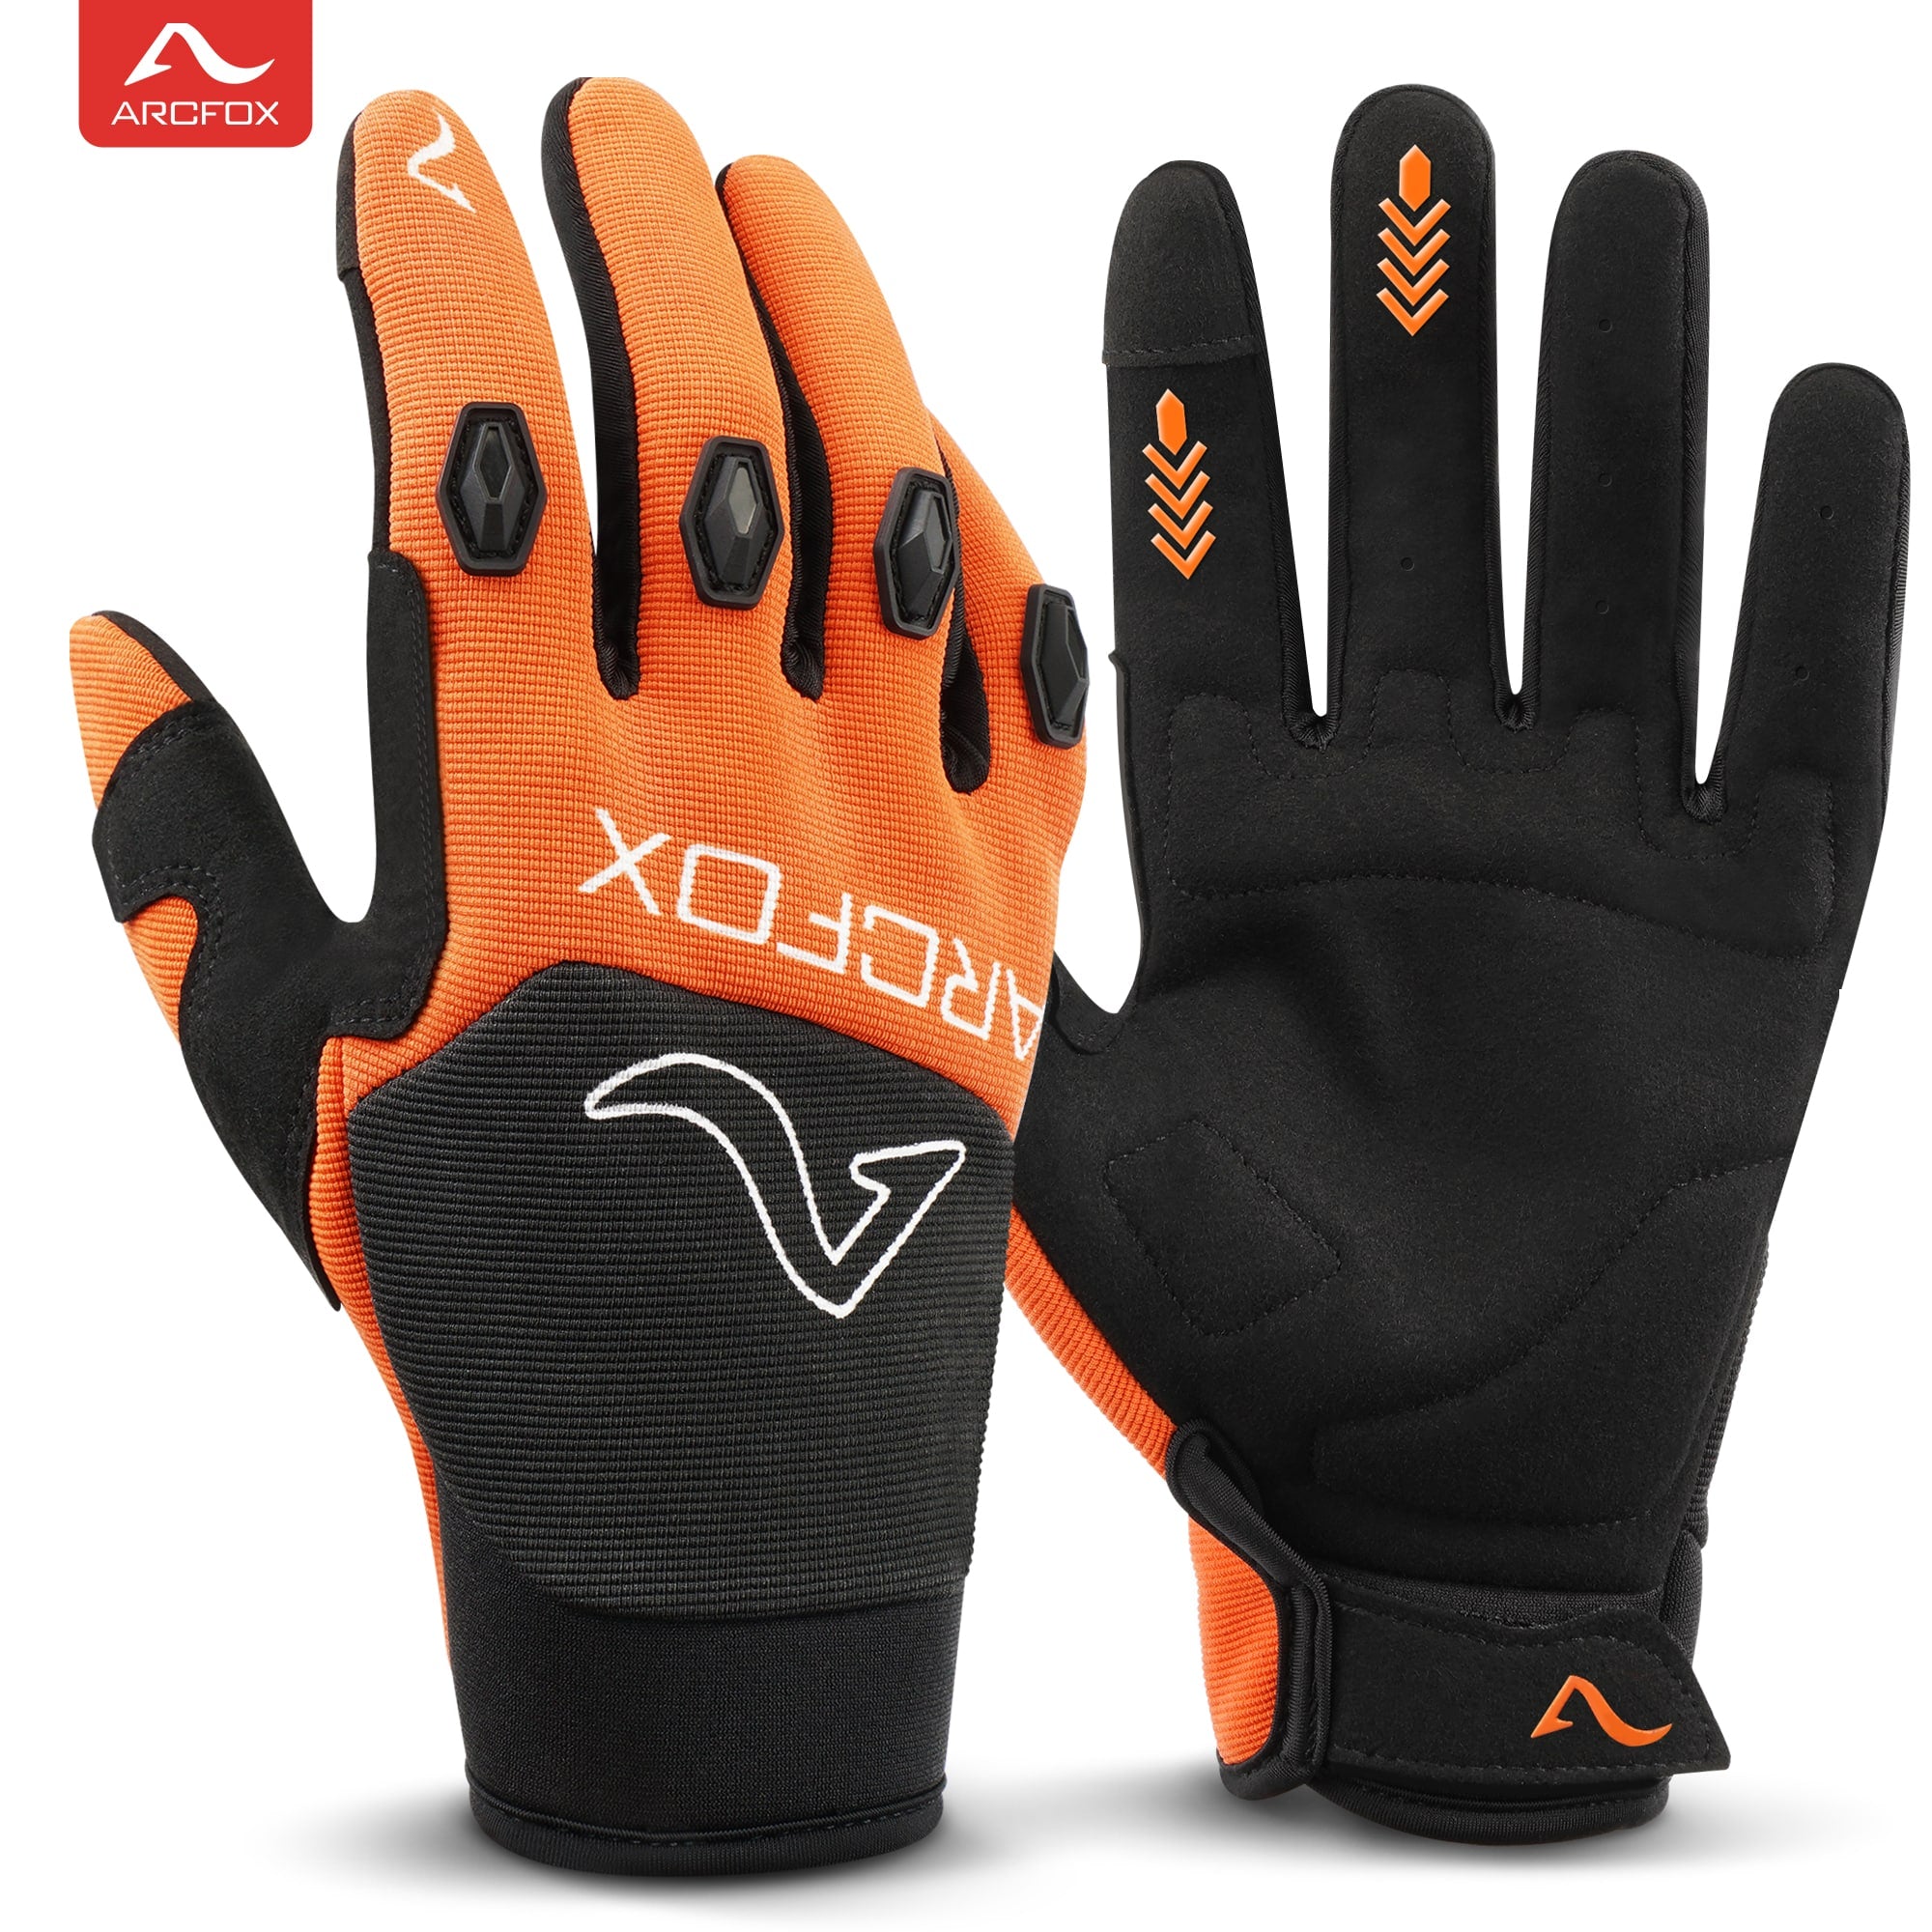 ARCFOX Dirt Bike Gloves for ATV UTV MTB Motocross Motorcycle Off-Road Riding Touch Screen Breathable Sweat-absorbing Fabric